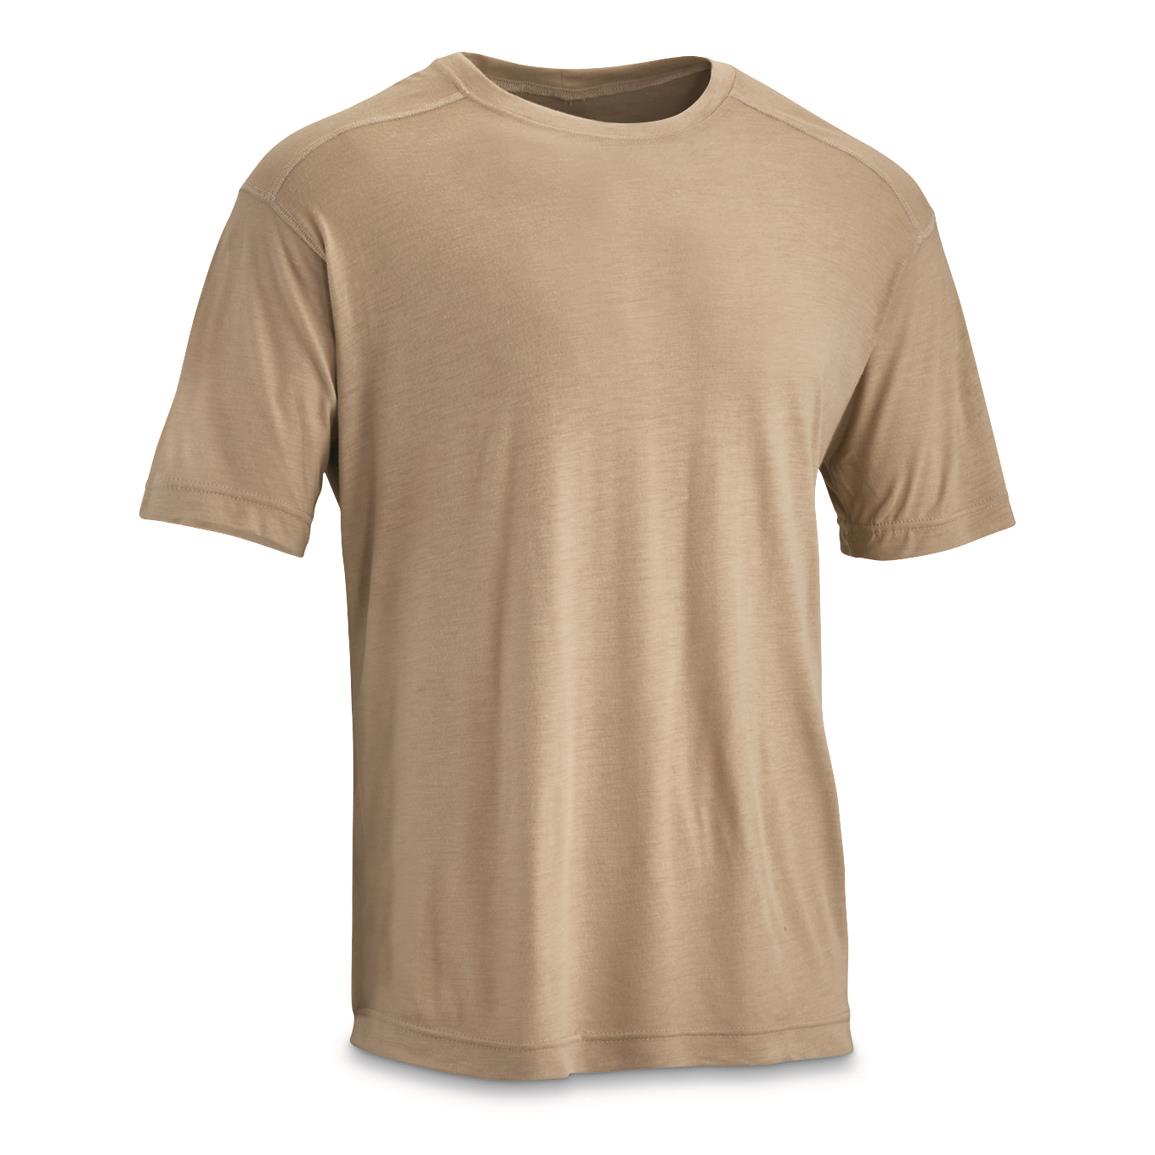 U.S. Military Surplus Fortiflame Layer I Short Sleeve Base Layer Shirt, New, Sand